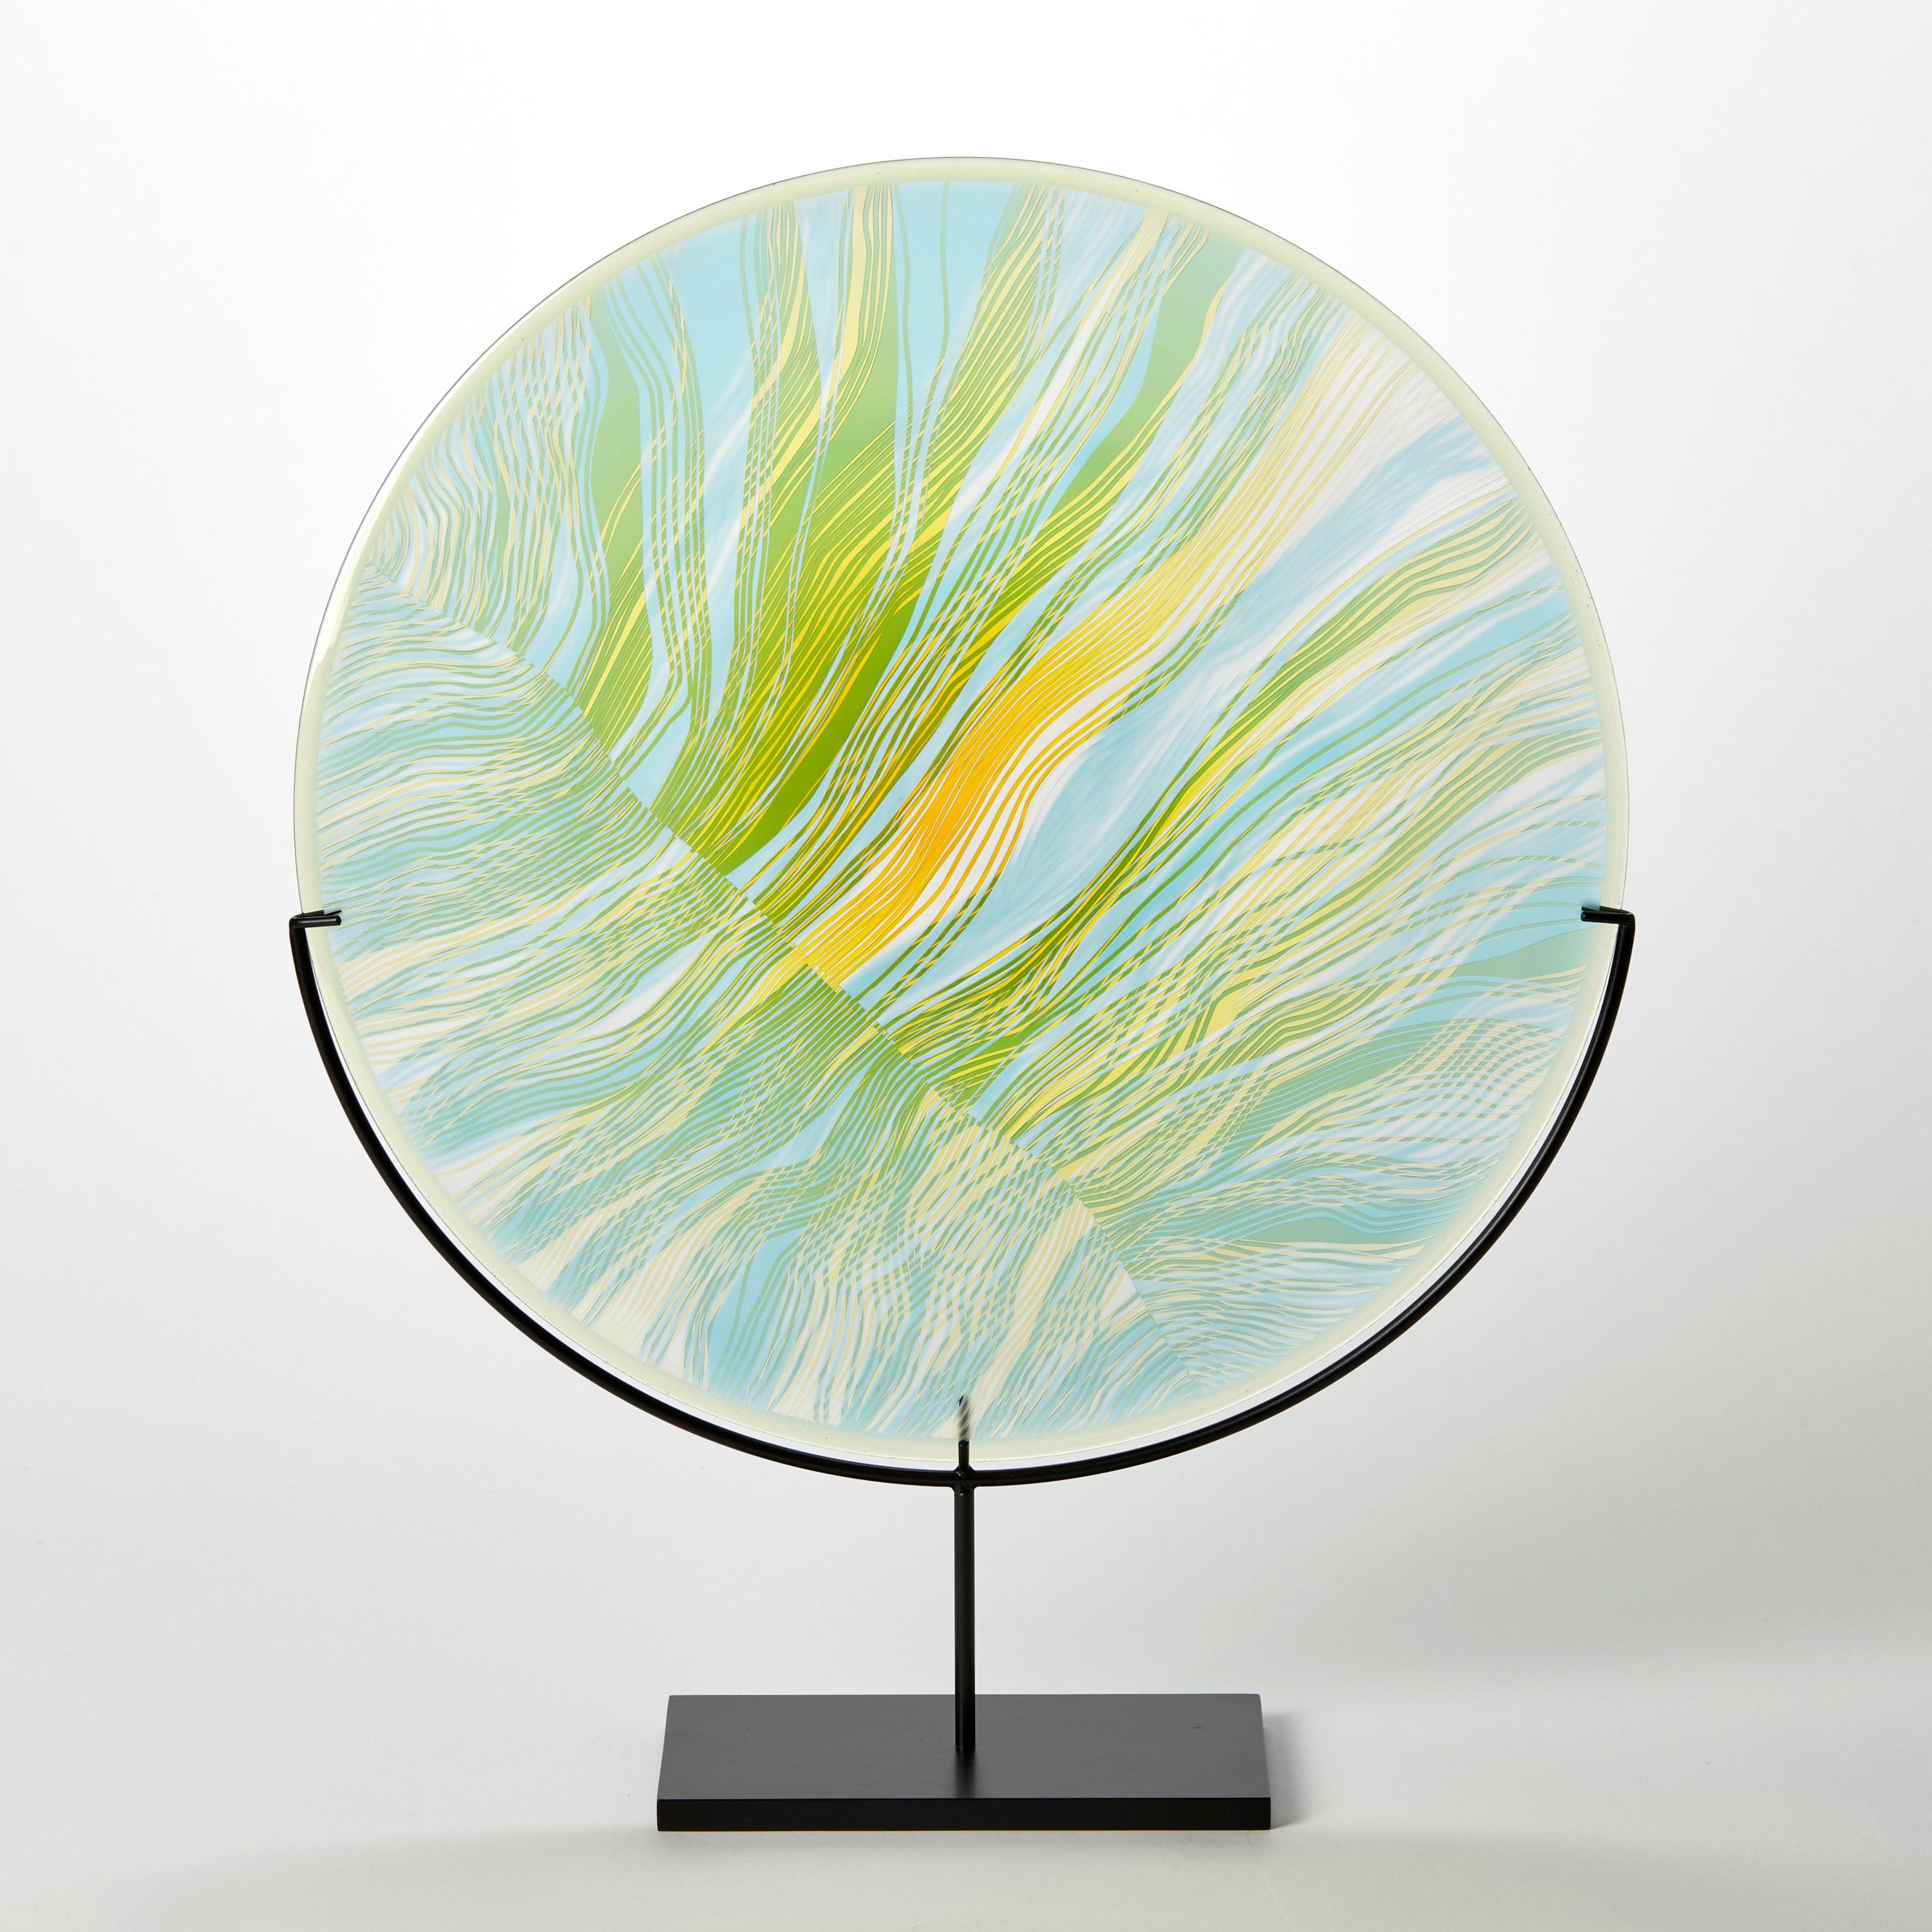 'Solar Storm Sky Blue over Gold' is a unique handblown and cut glass artwork by the British artist, Kate Jones of Gillies Jones.

In the artist's own words:

“This new body of work references both the evident structure of the landscape and the vast